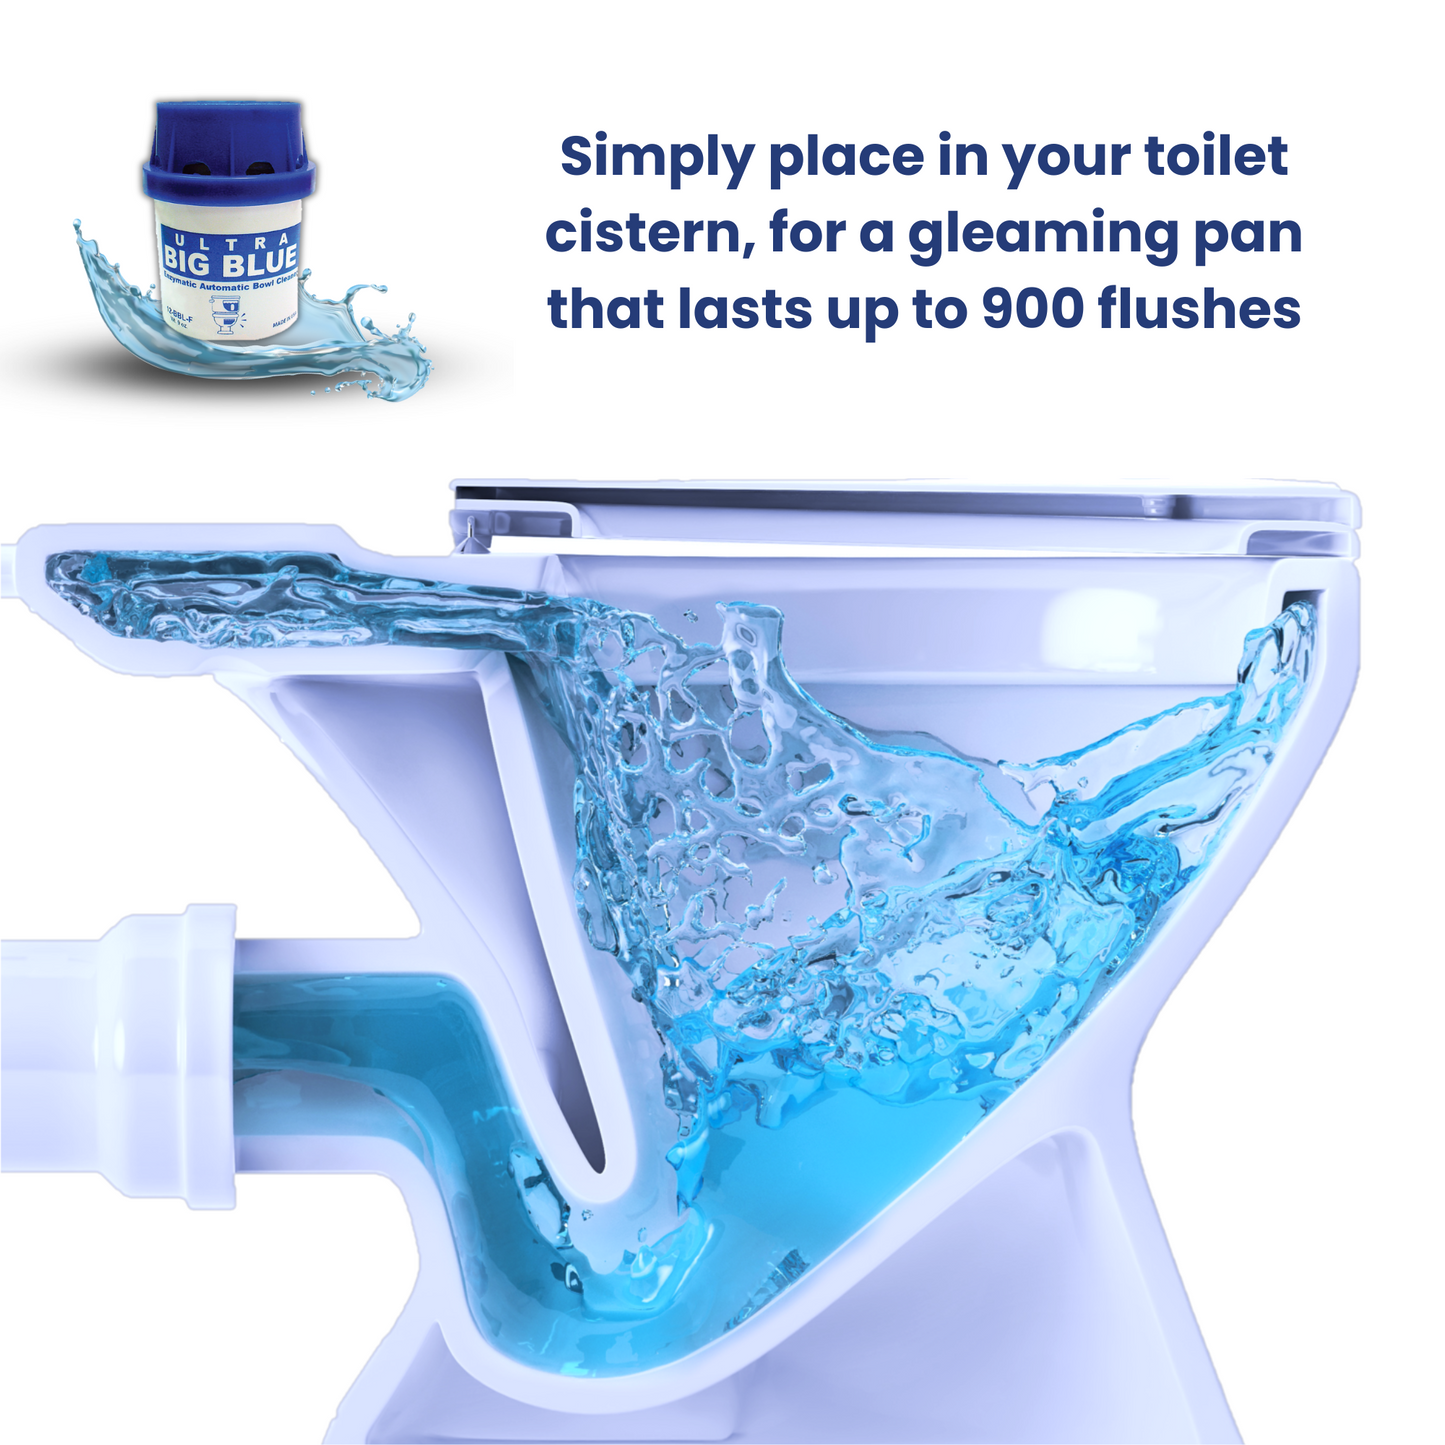 Side profile of a toilet showing blue water swirling around. Inset image of Ultra Big Blue and the text "Simply place in your toilet cistern, for a gleaming pan that lasts up to 900 flushes."